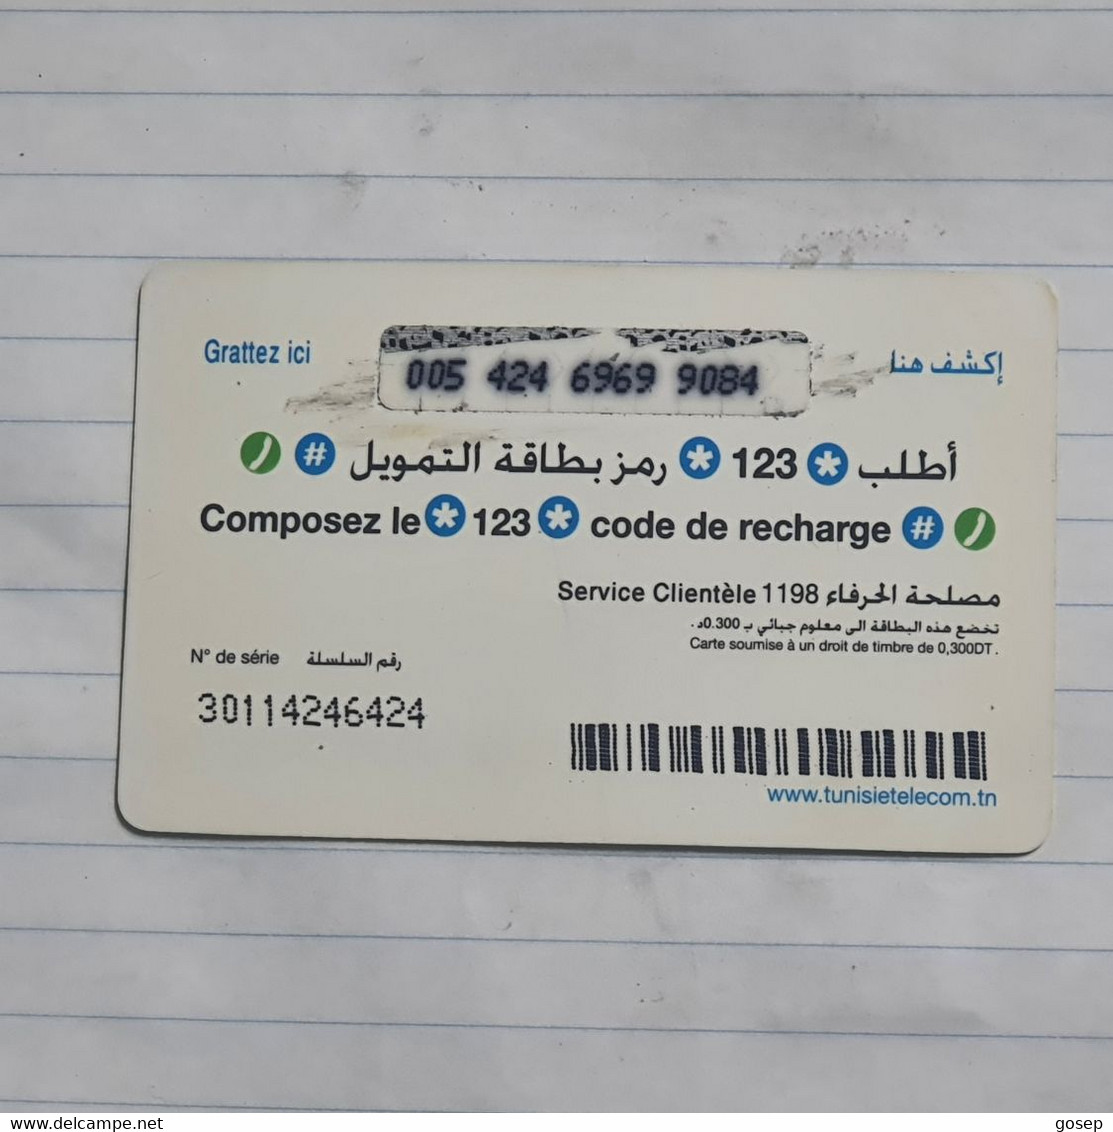 TUNISIA-(TN-TTL-REF-0032H)-GIRL1-(109)-(005-424-6969-9084)-(11/98)-(look From Out Side Card-BARCODE)-used Card - Tunisie